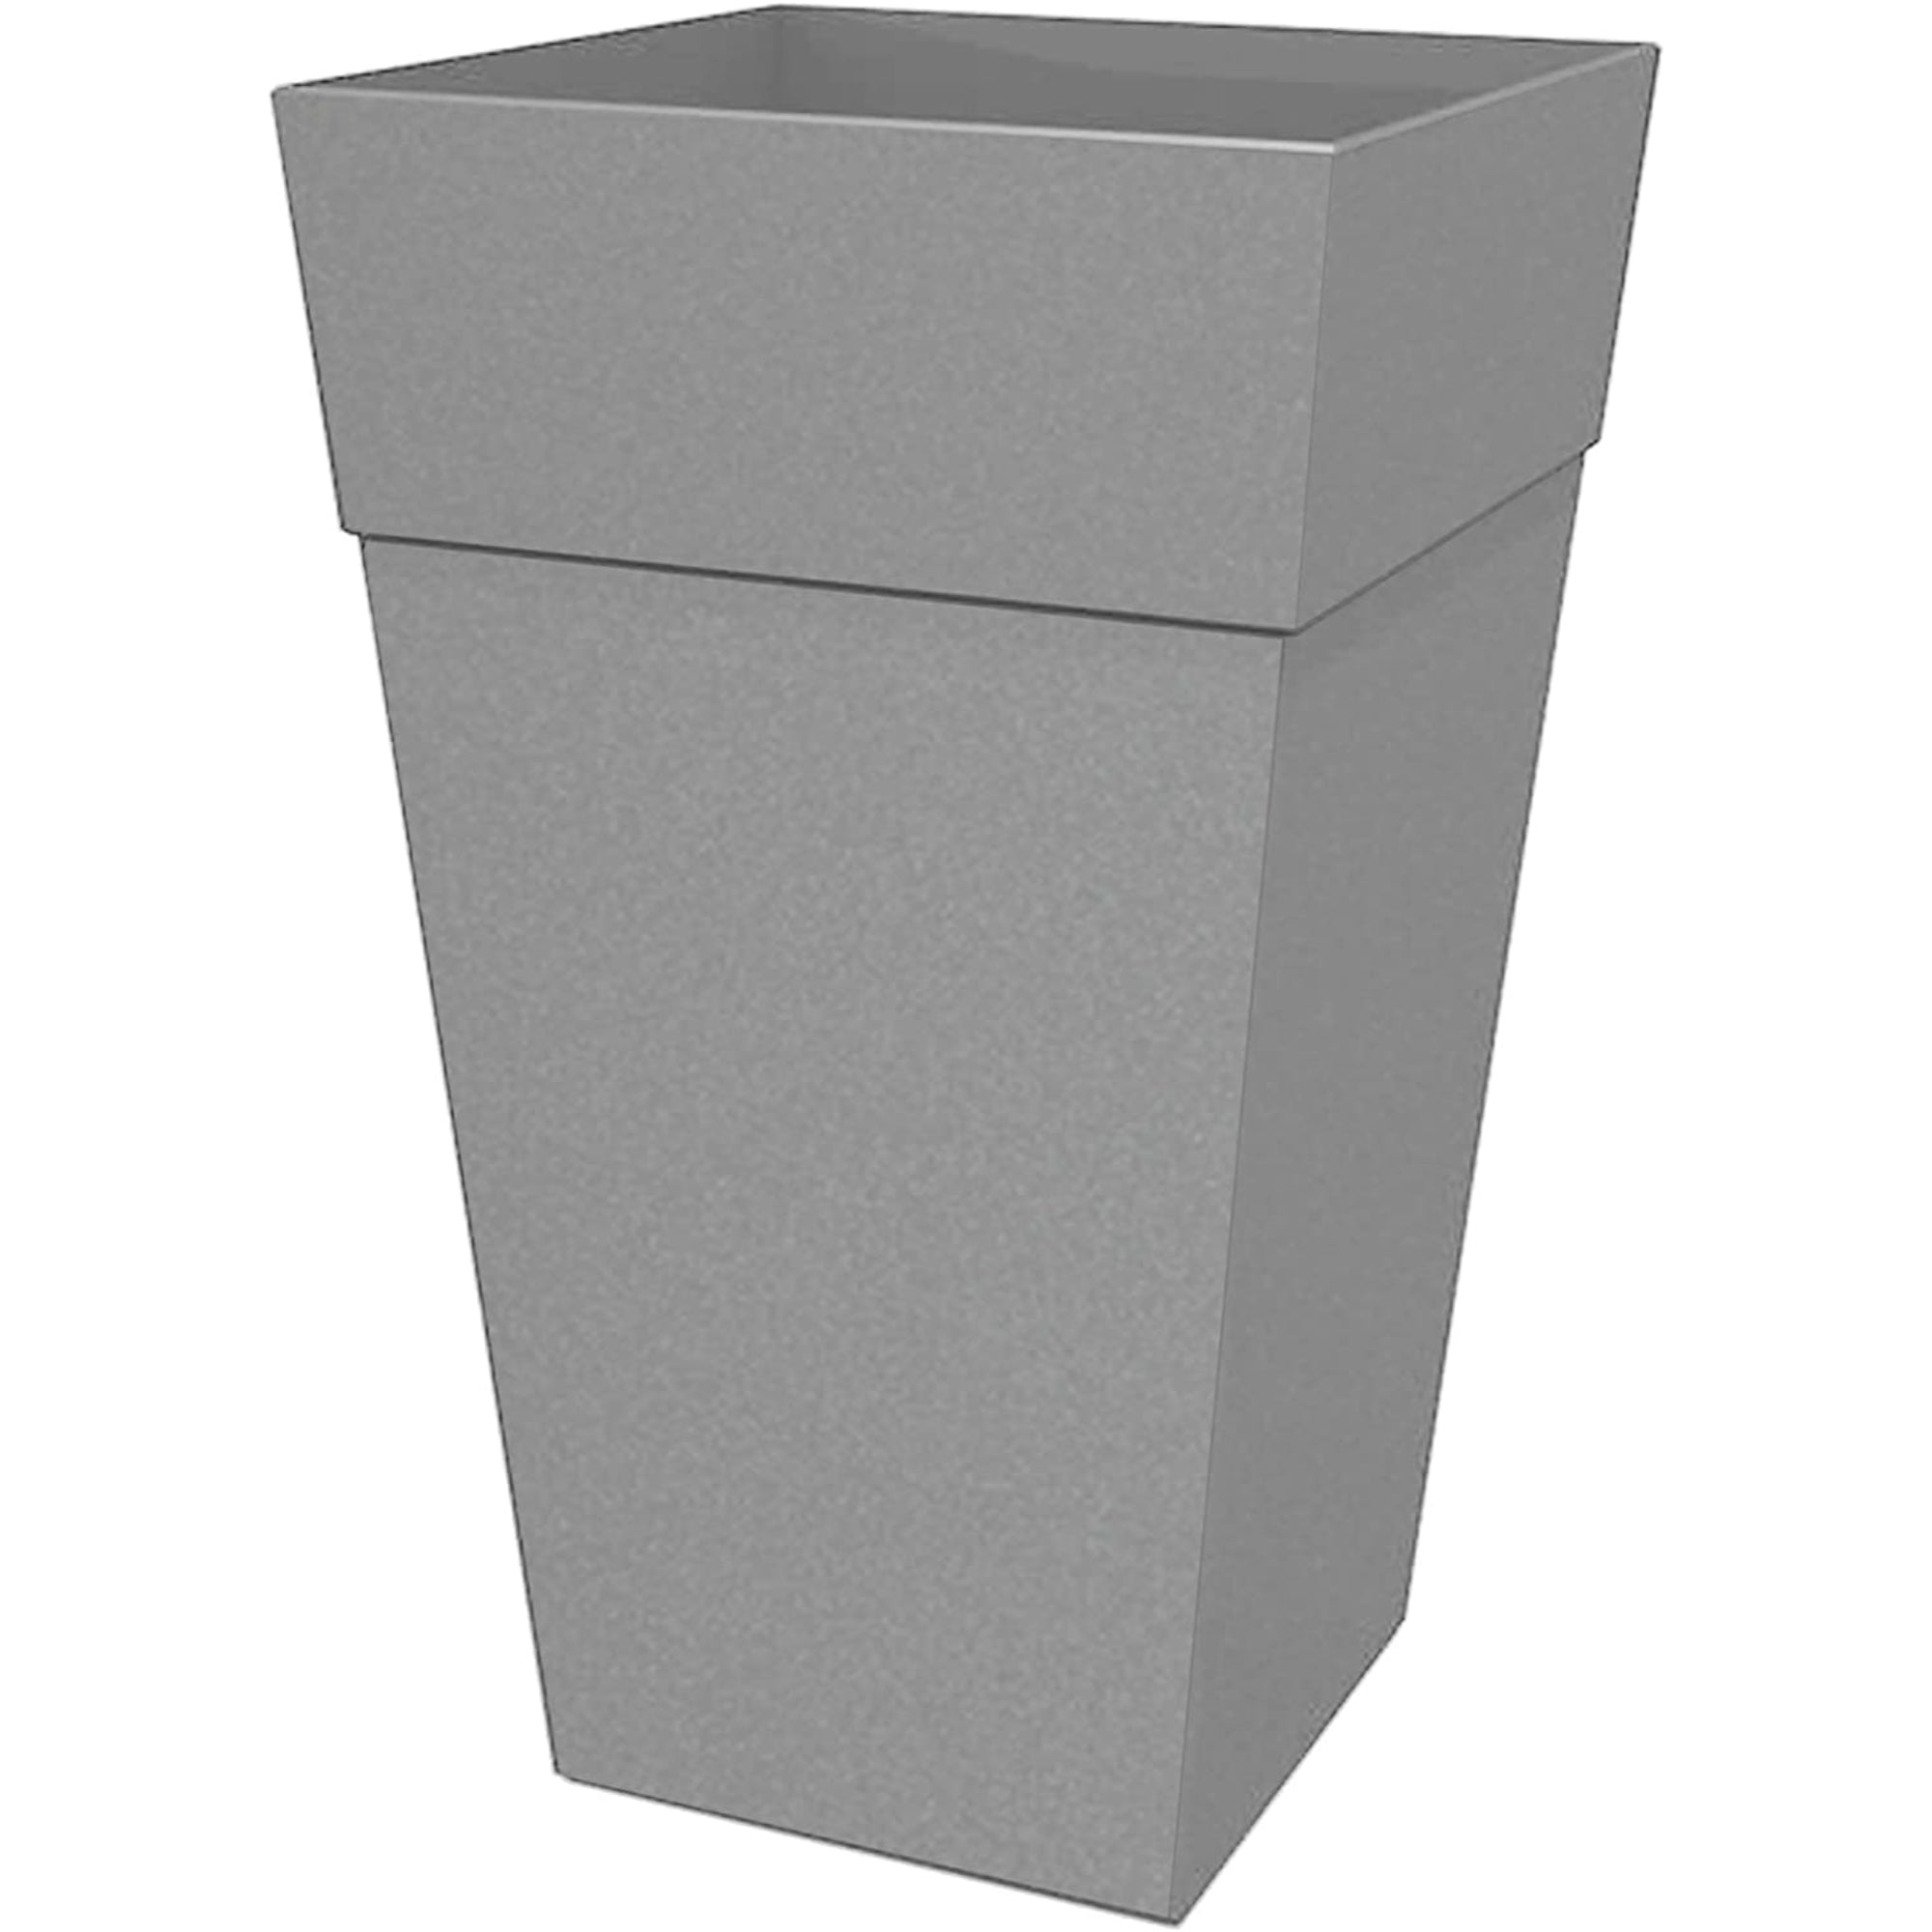 Bloem Finley Tall Indoor Outdoor Plastic Square Planter, 25 Inches